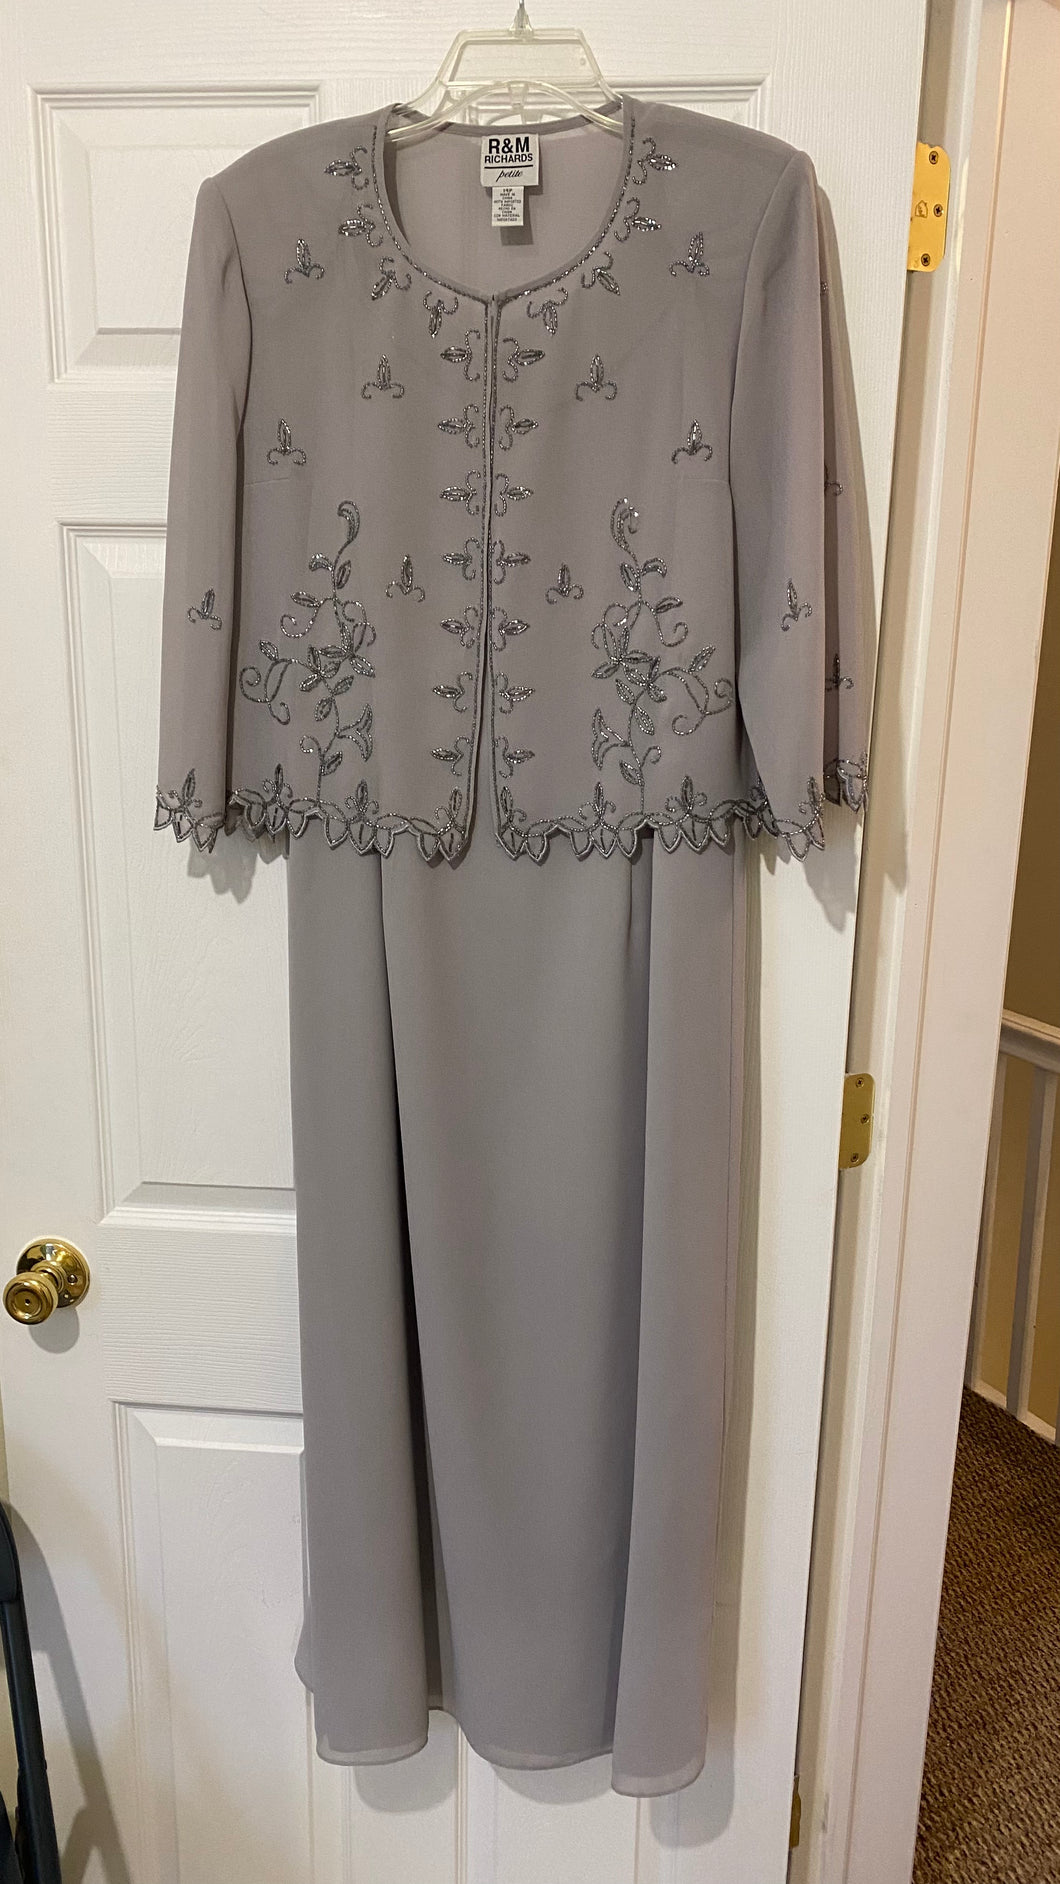 THOM300-S Grey Gown with Jacket. Size 14P